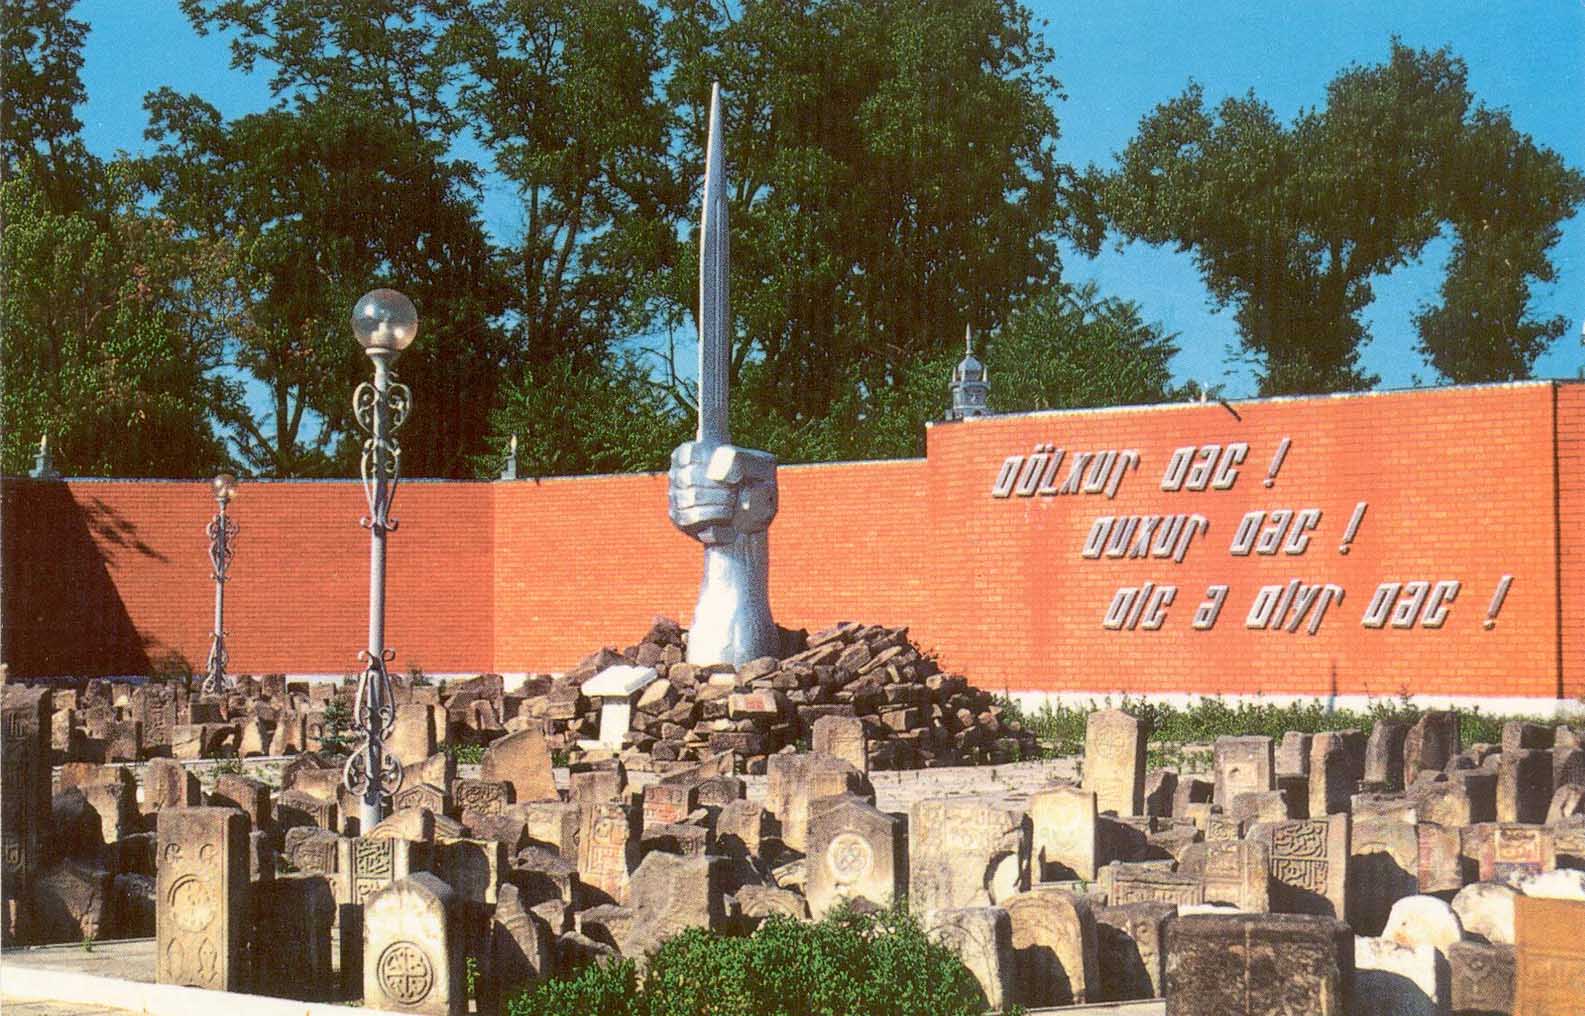 Initial view of the memorial to the Chechen victims of the Stalinist deportation with dozens of old gravestones and the slogan: “We won’t break down! We won’t sob! We won’t forget!” Photo: sakharov-center.ru ~